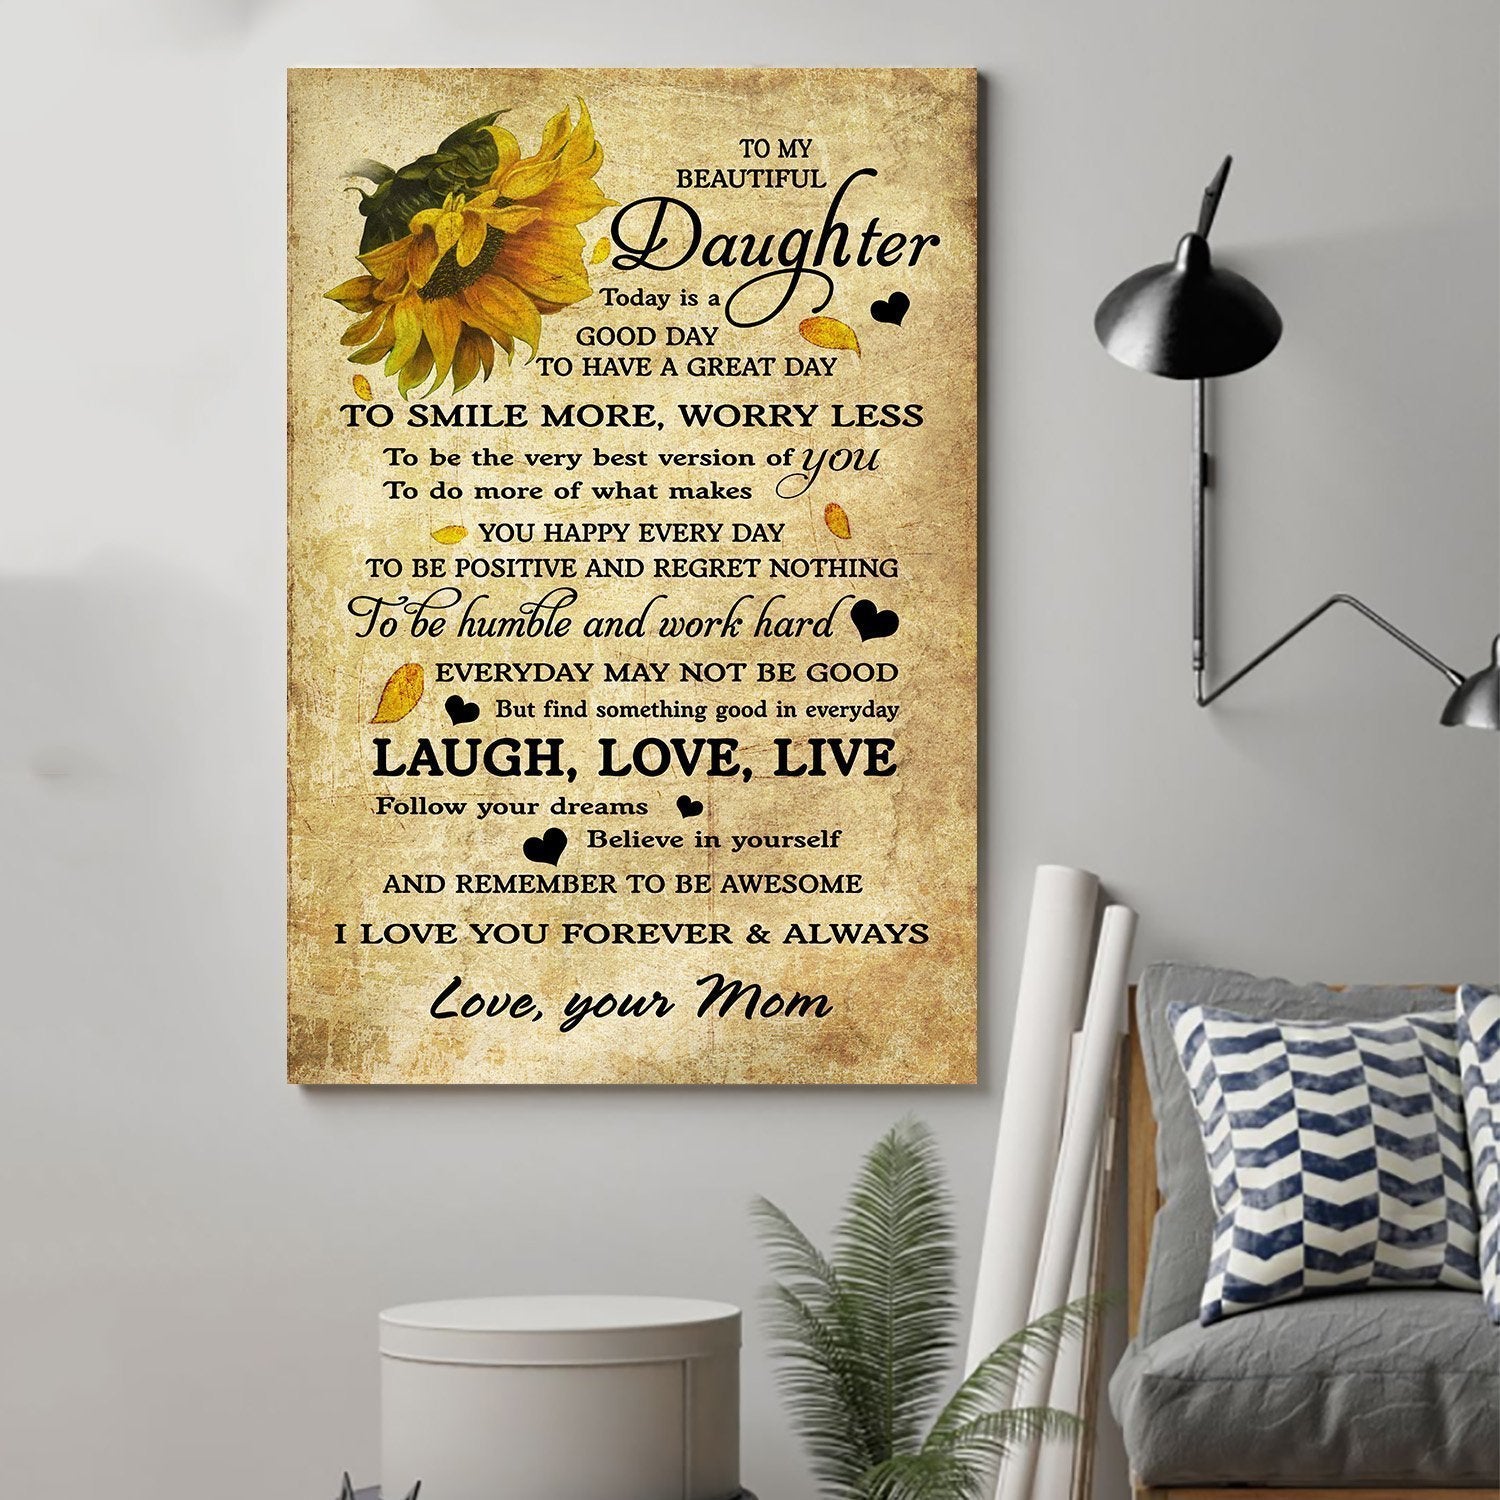 sunflower Canvas and Poster ��� Mom to daughter ��� today is a good day vs2 wall decor visual art - GIFTCUSTOM